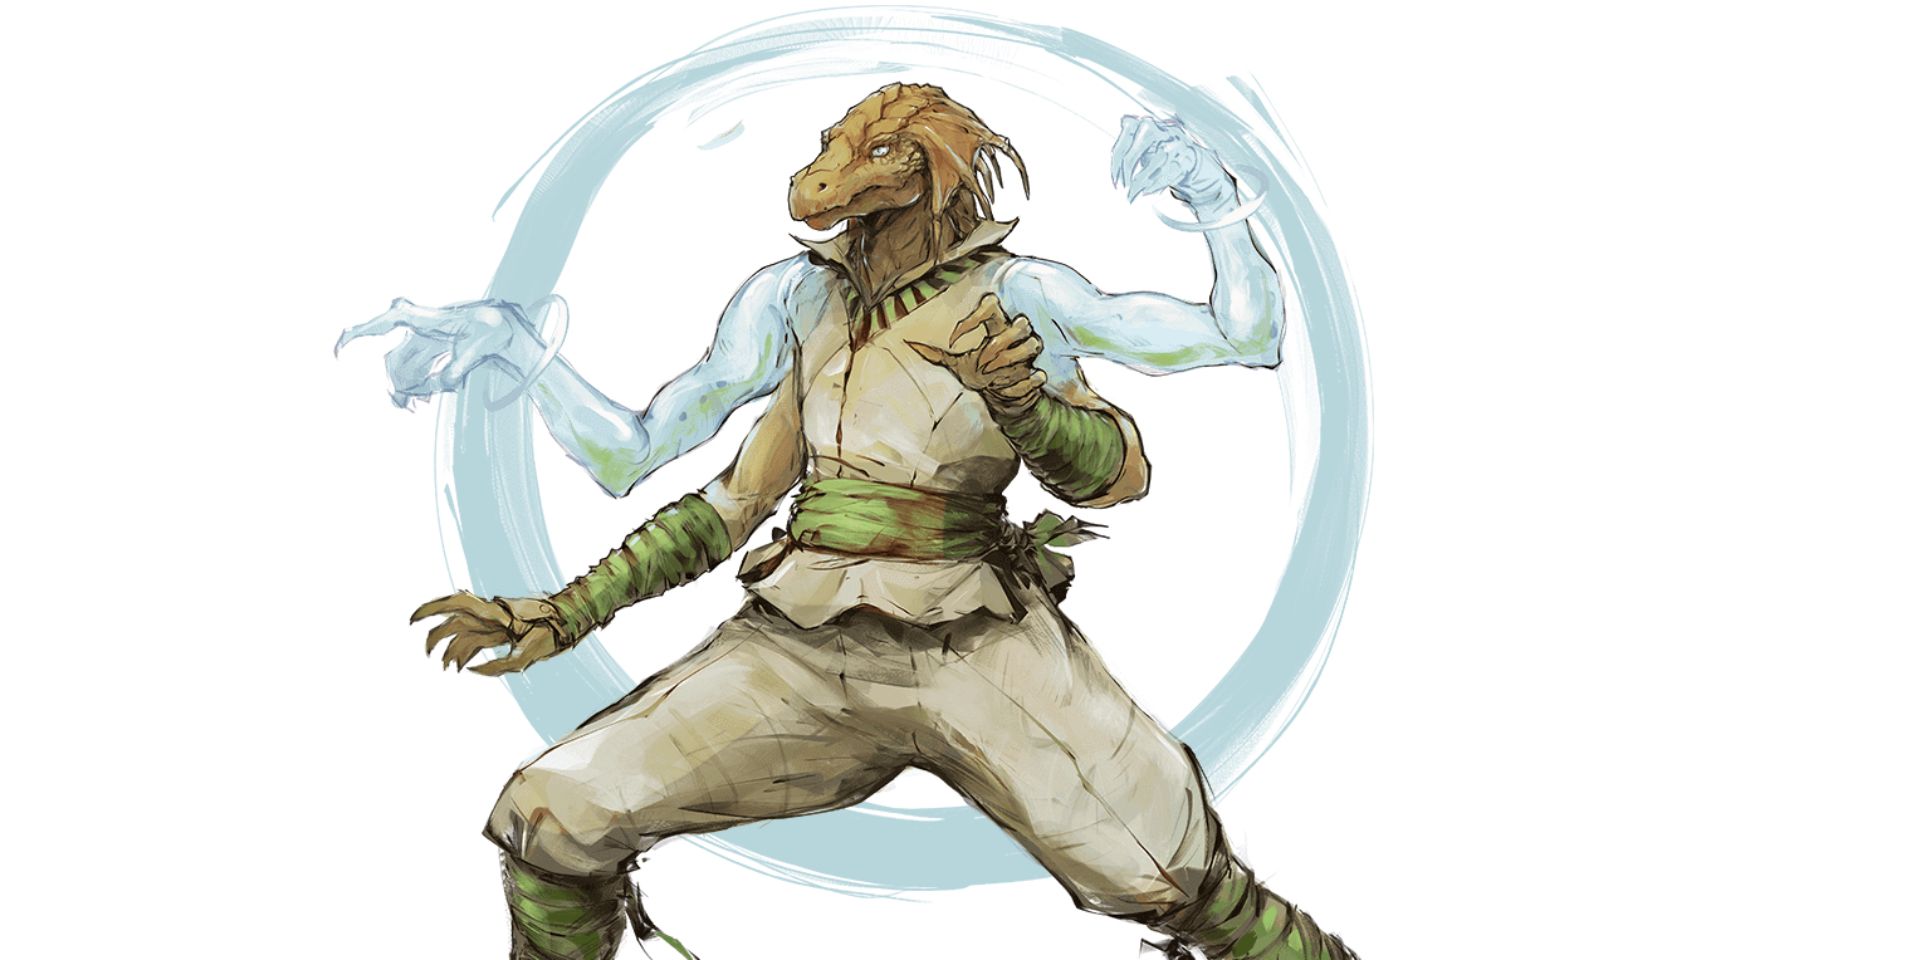 Dungeons &amp; Dragons DnD D&amp;D Subclasses Way Of The Astral Self Monk